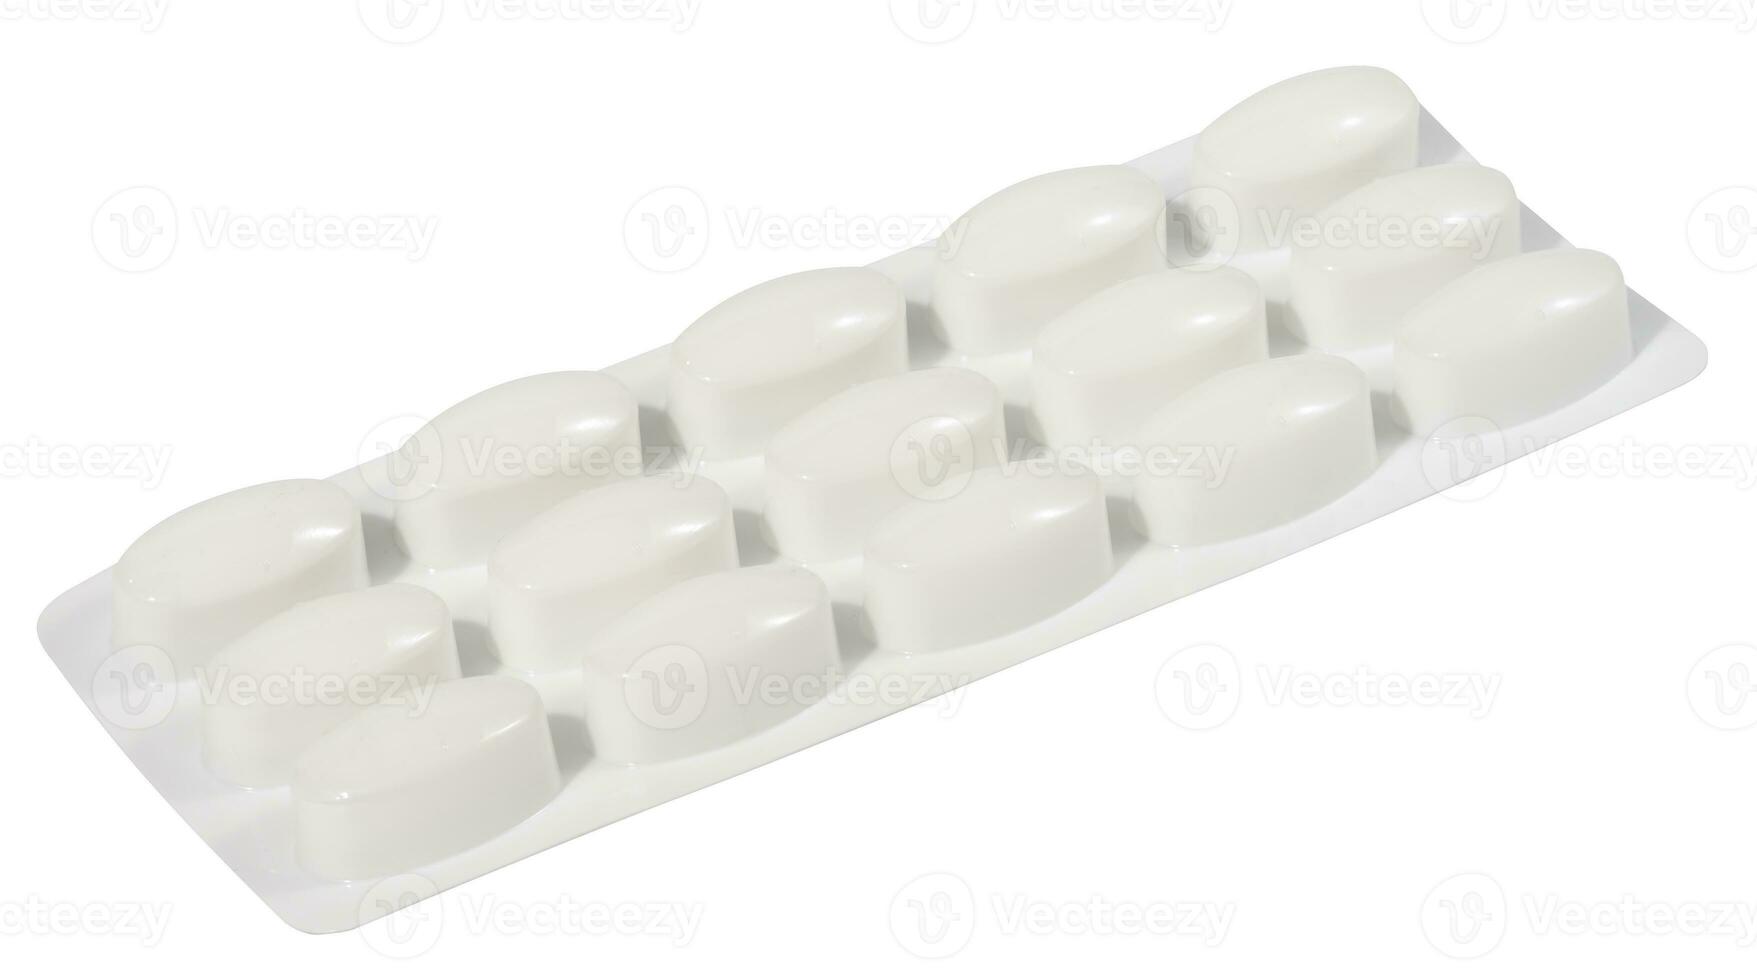 Oval tablets in white plastic packaging photo